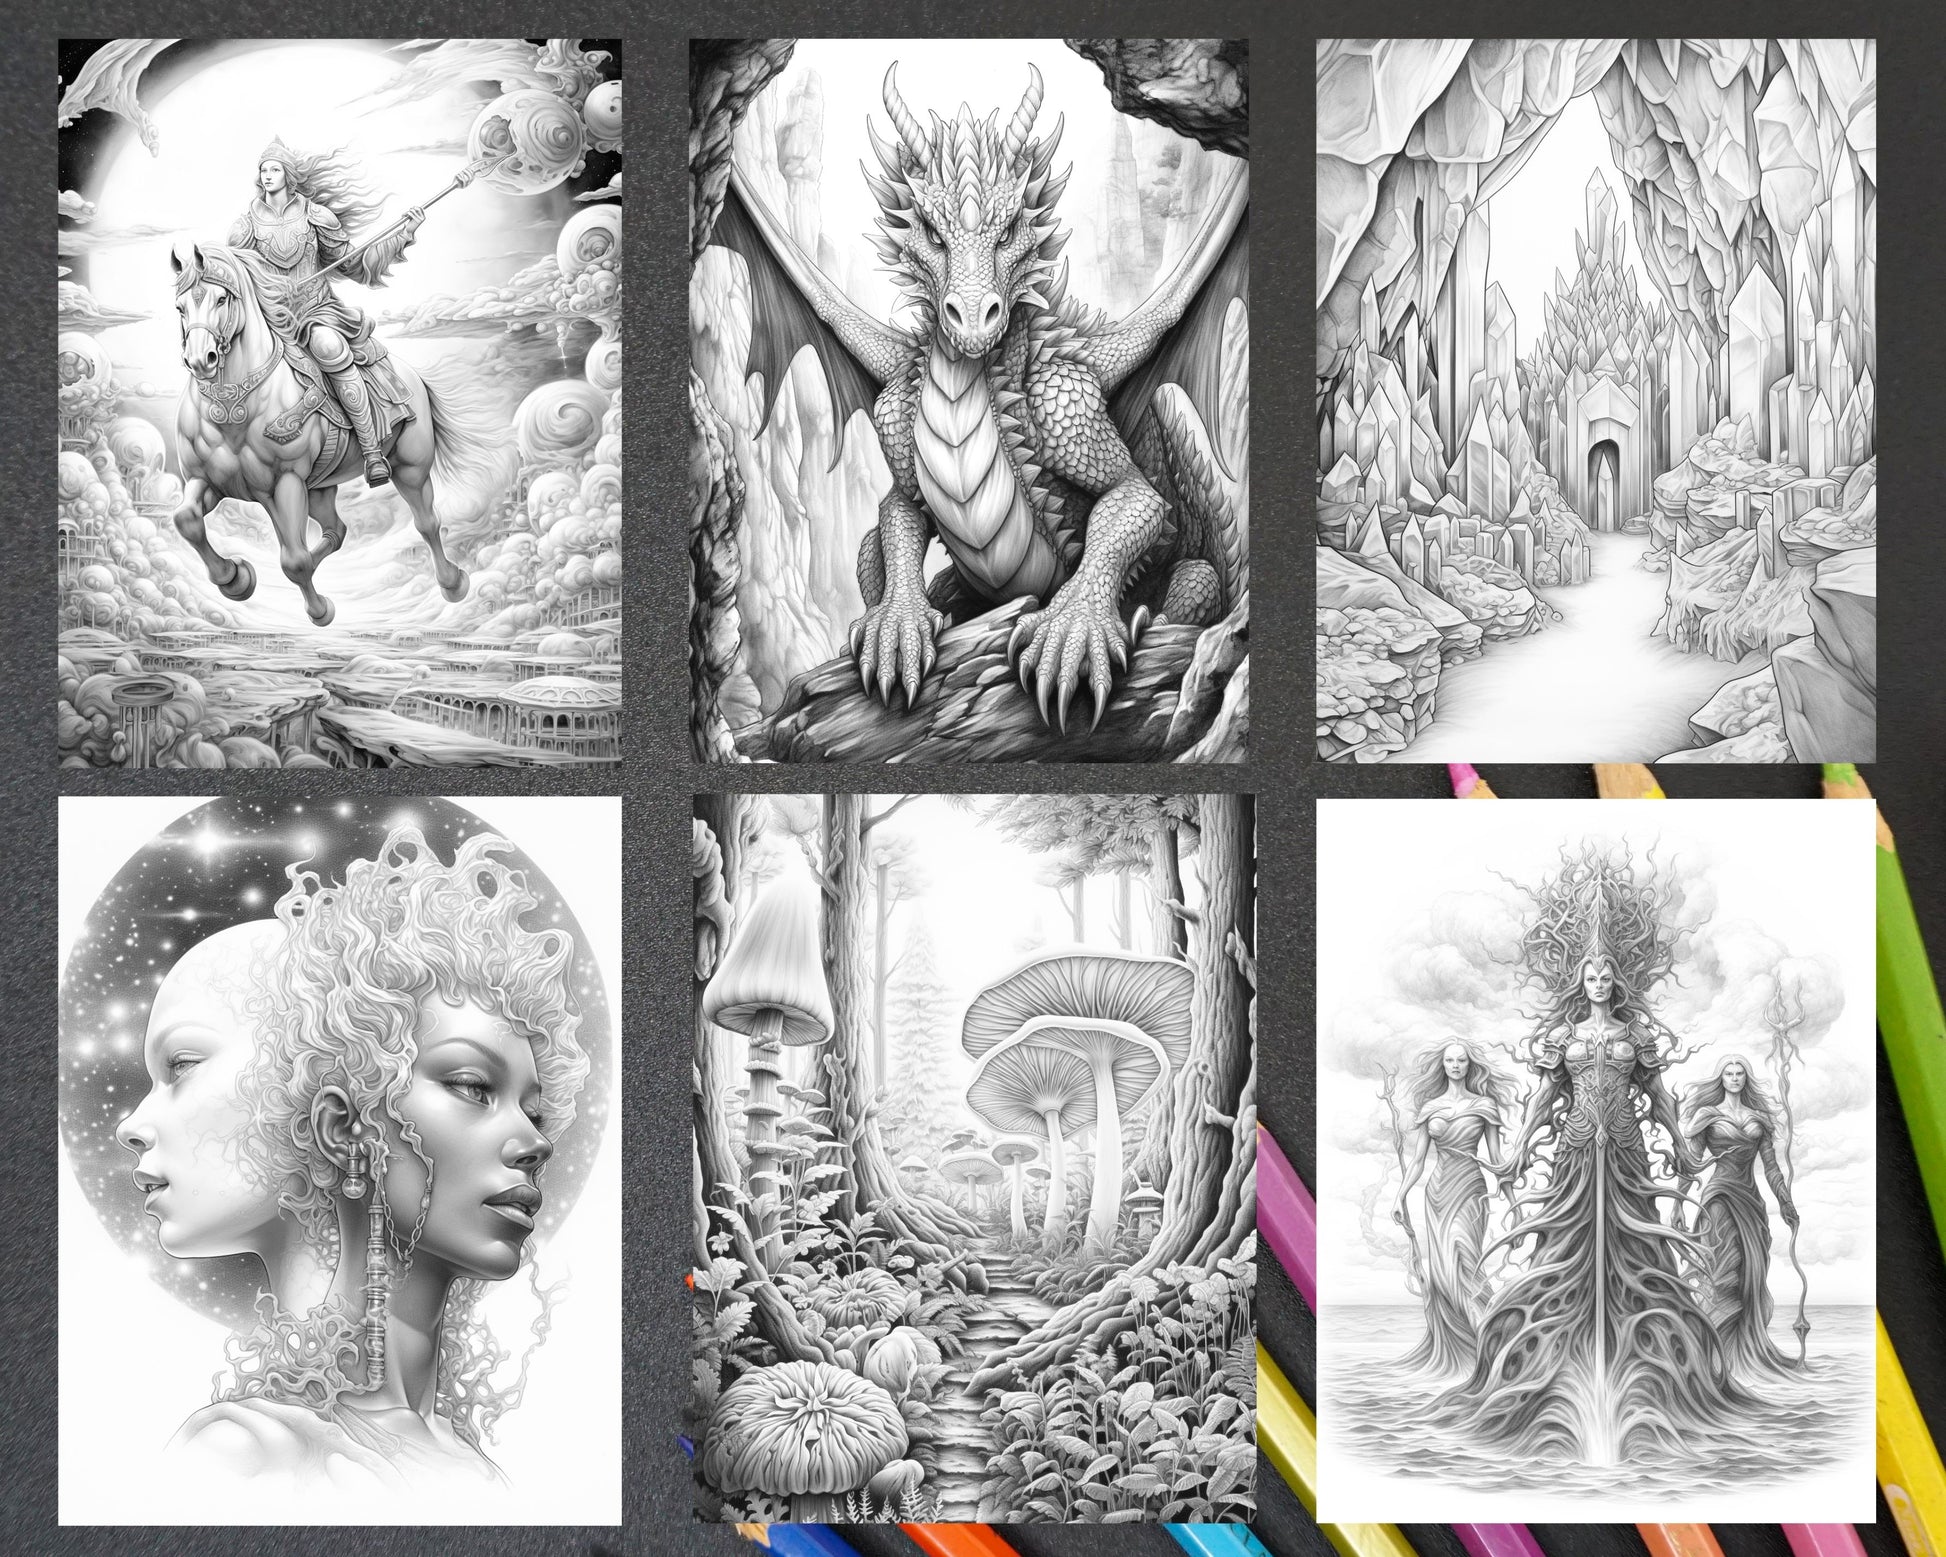 Mystical World Grayscale Coloring Pages, Adult Printable Coloring Pages, Fantasy Designs Coloring Sheets, Instant Download Coloring Art, Relaxing and Mindful Coloring